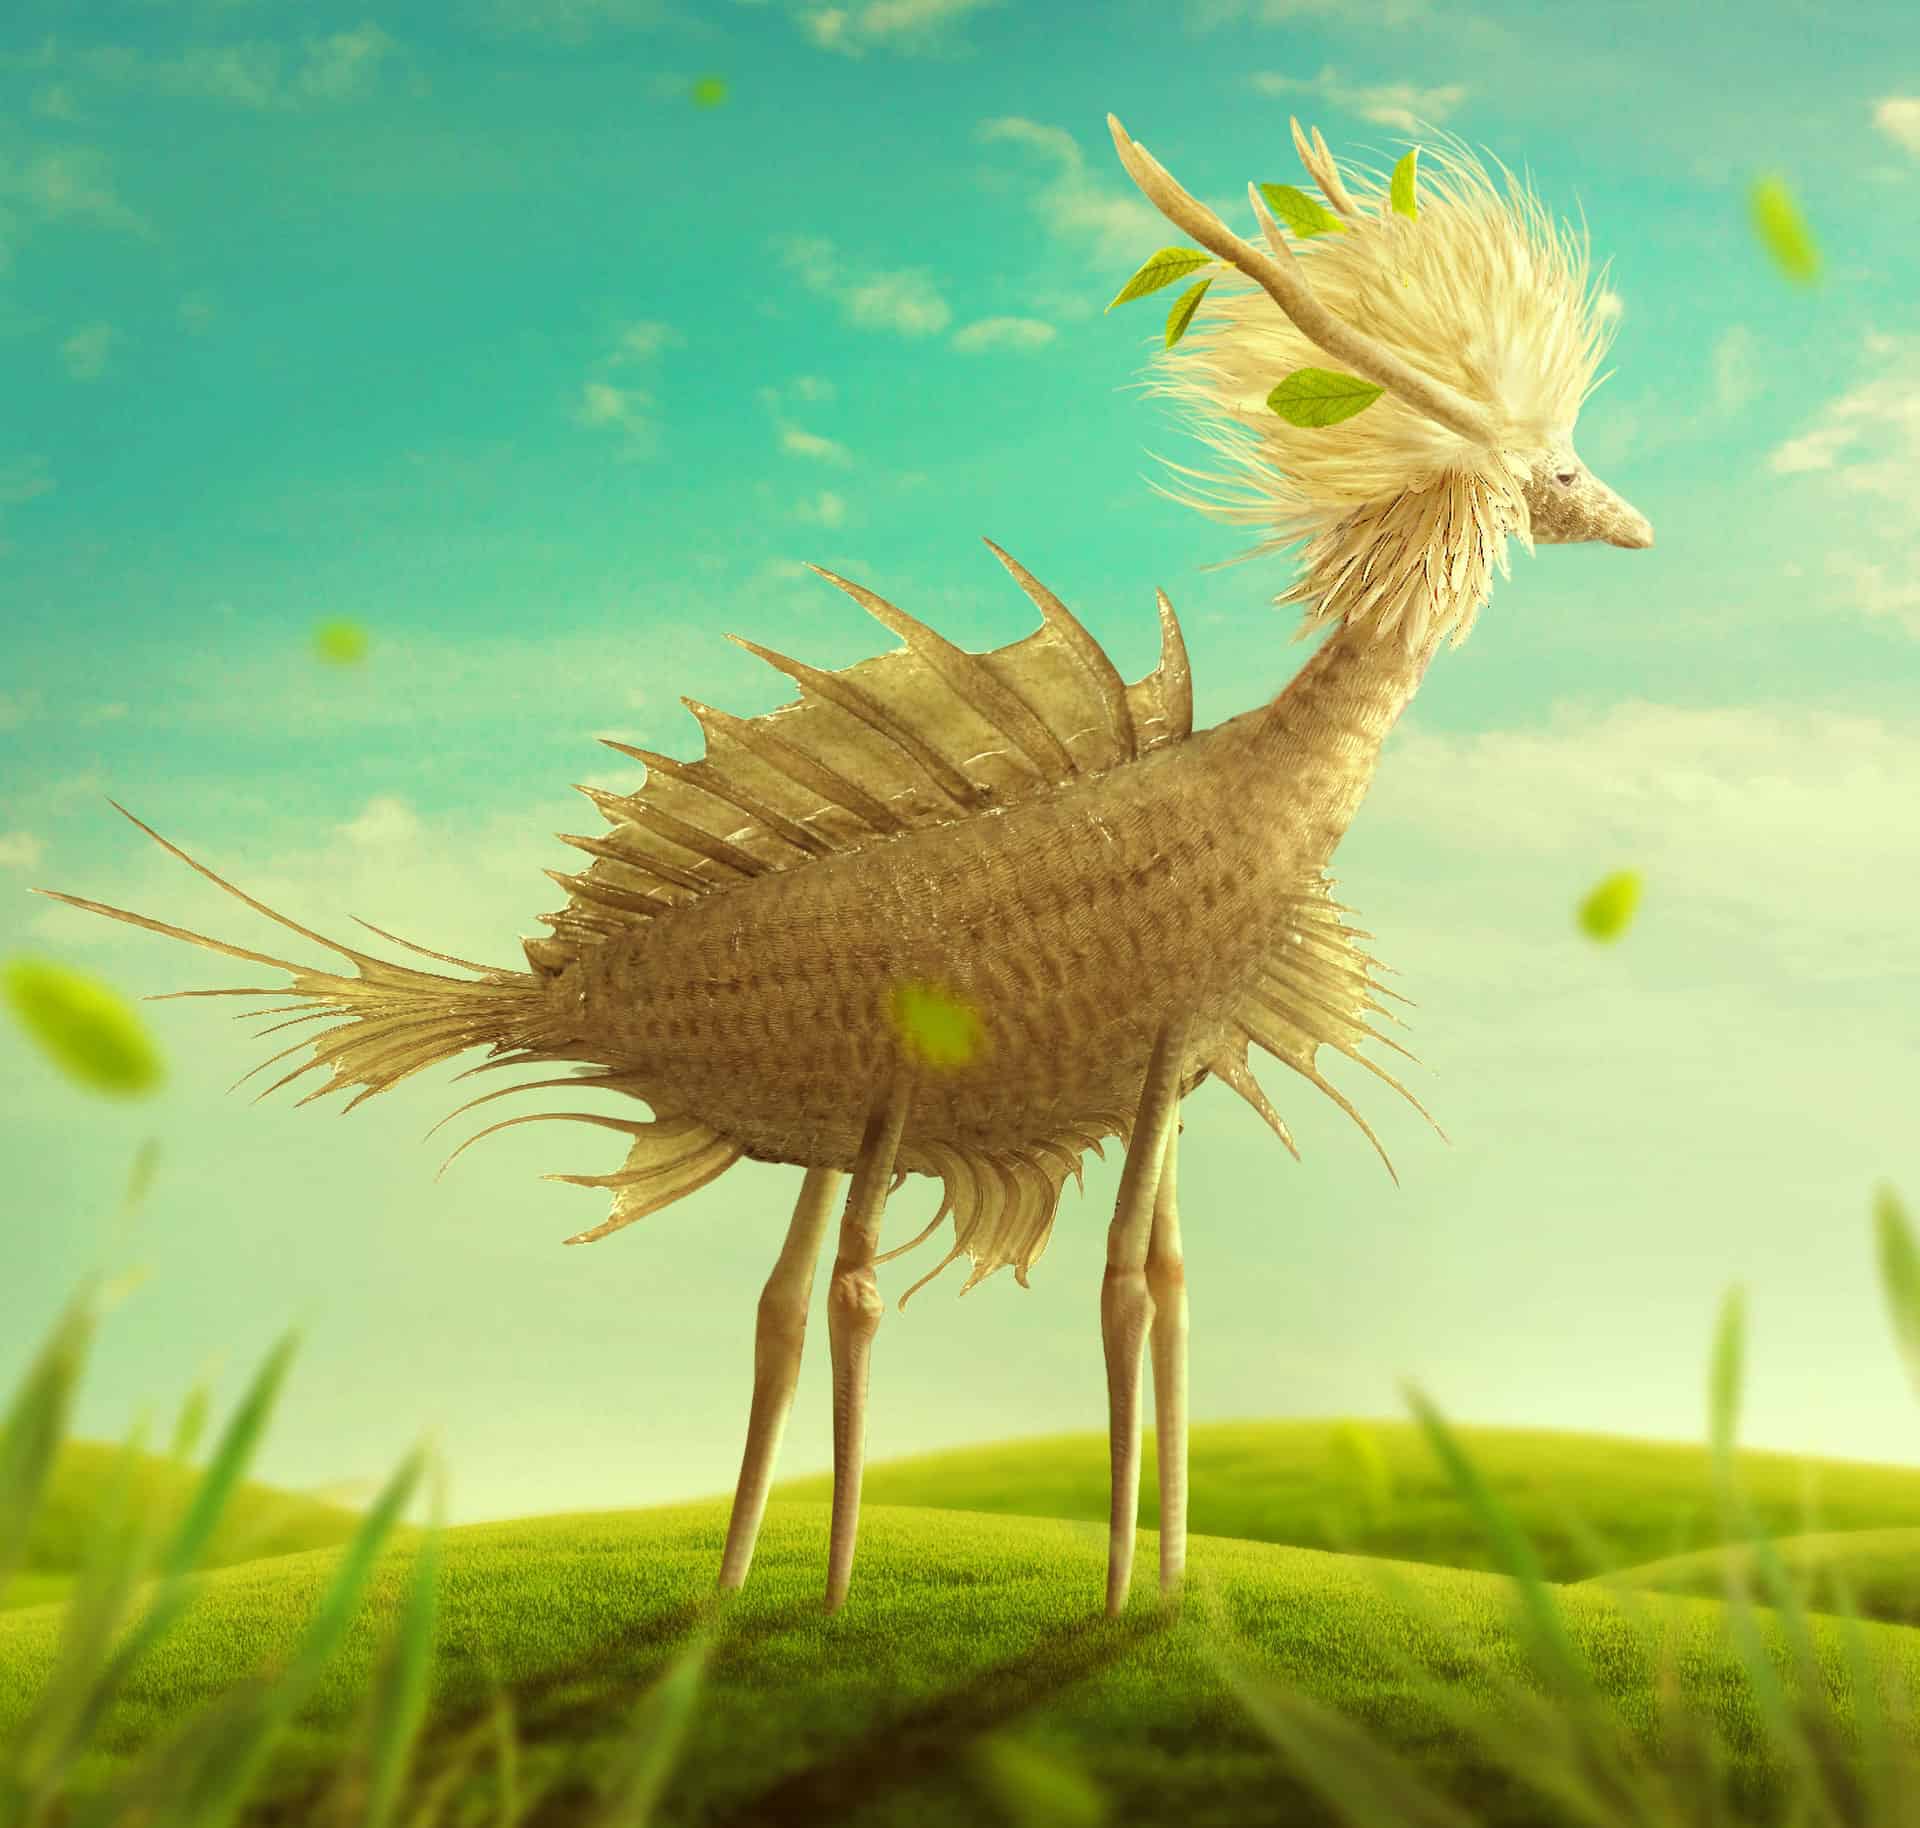 How to Create a Fantasy Creature with Adobe Photoshop